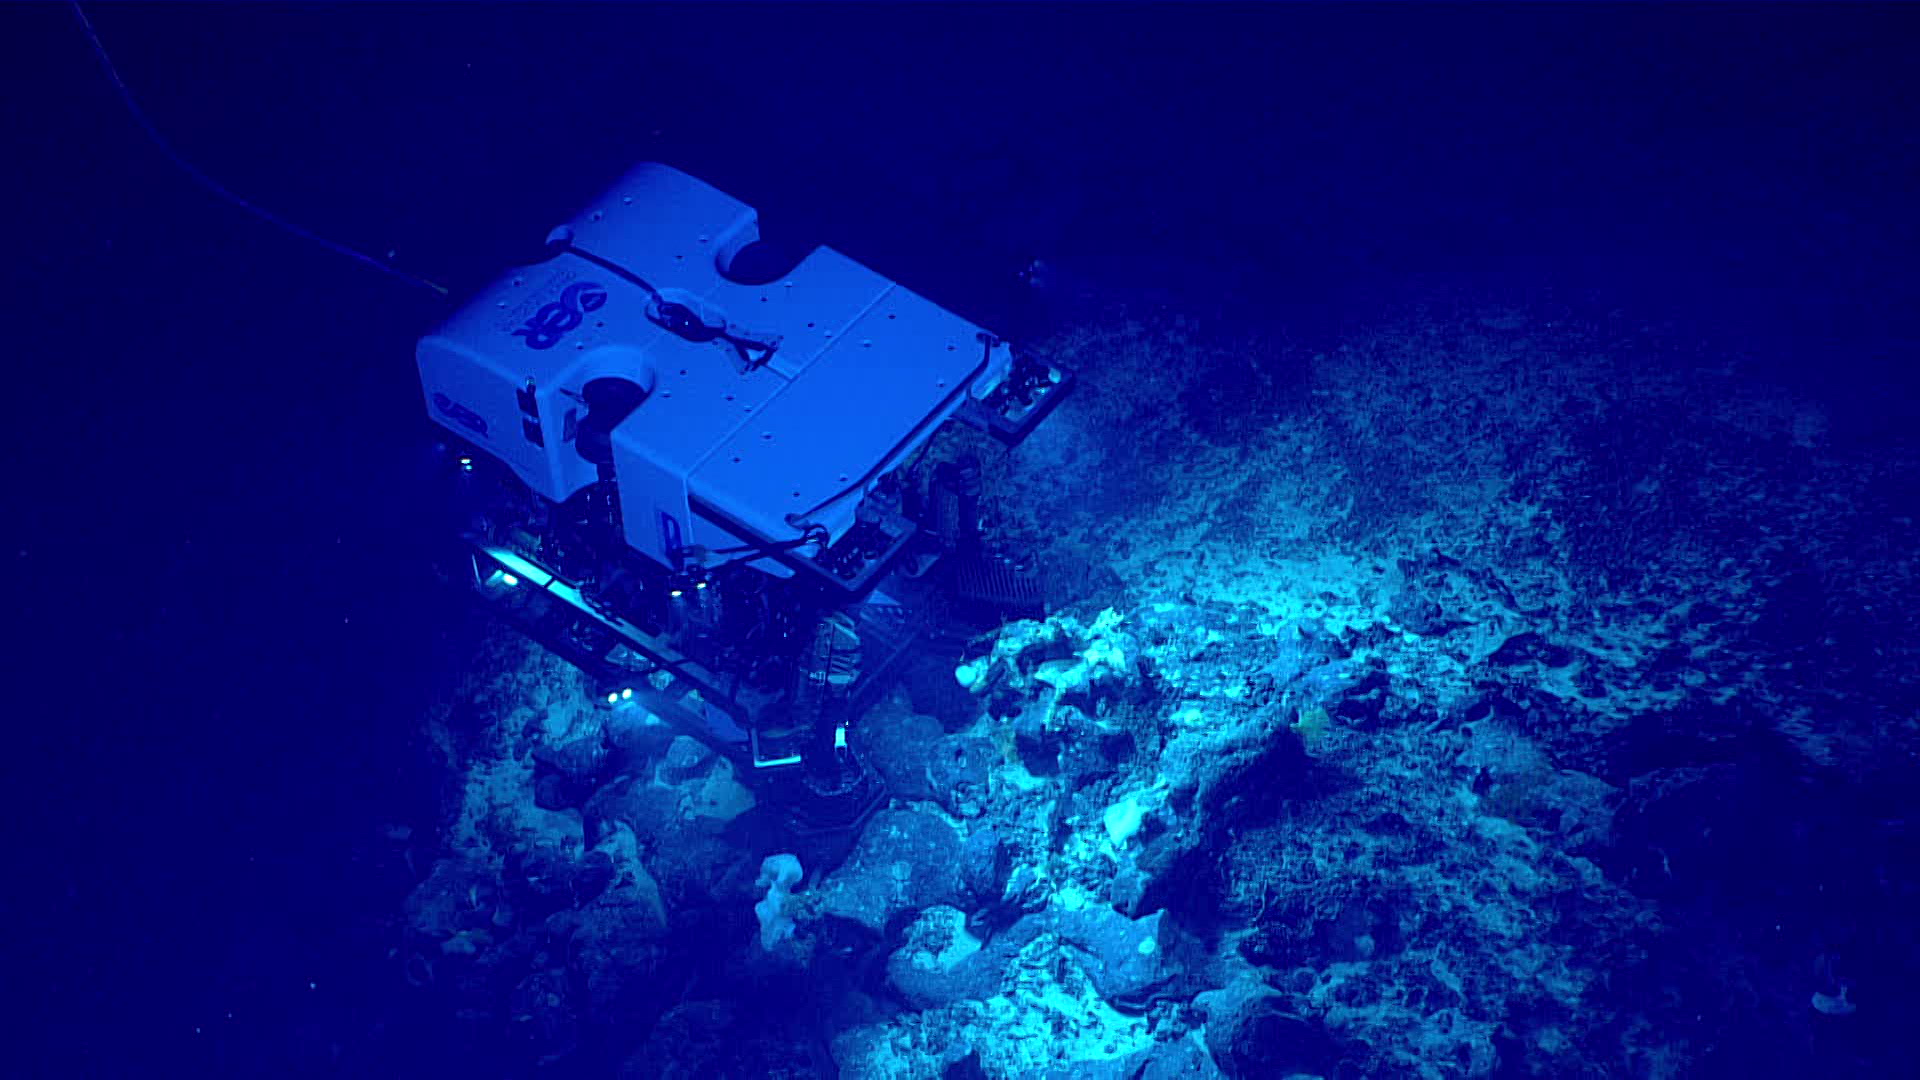 Remotely operated vehicle Deep Discoverer images a coral community during the second Voyage to the Ridge 2022 expedition.